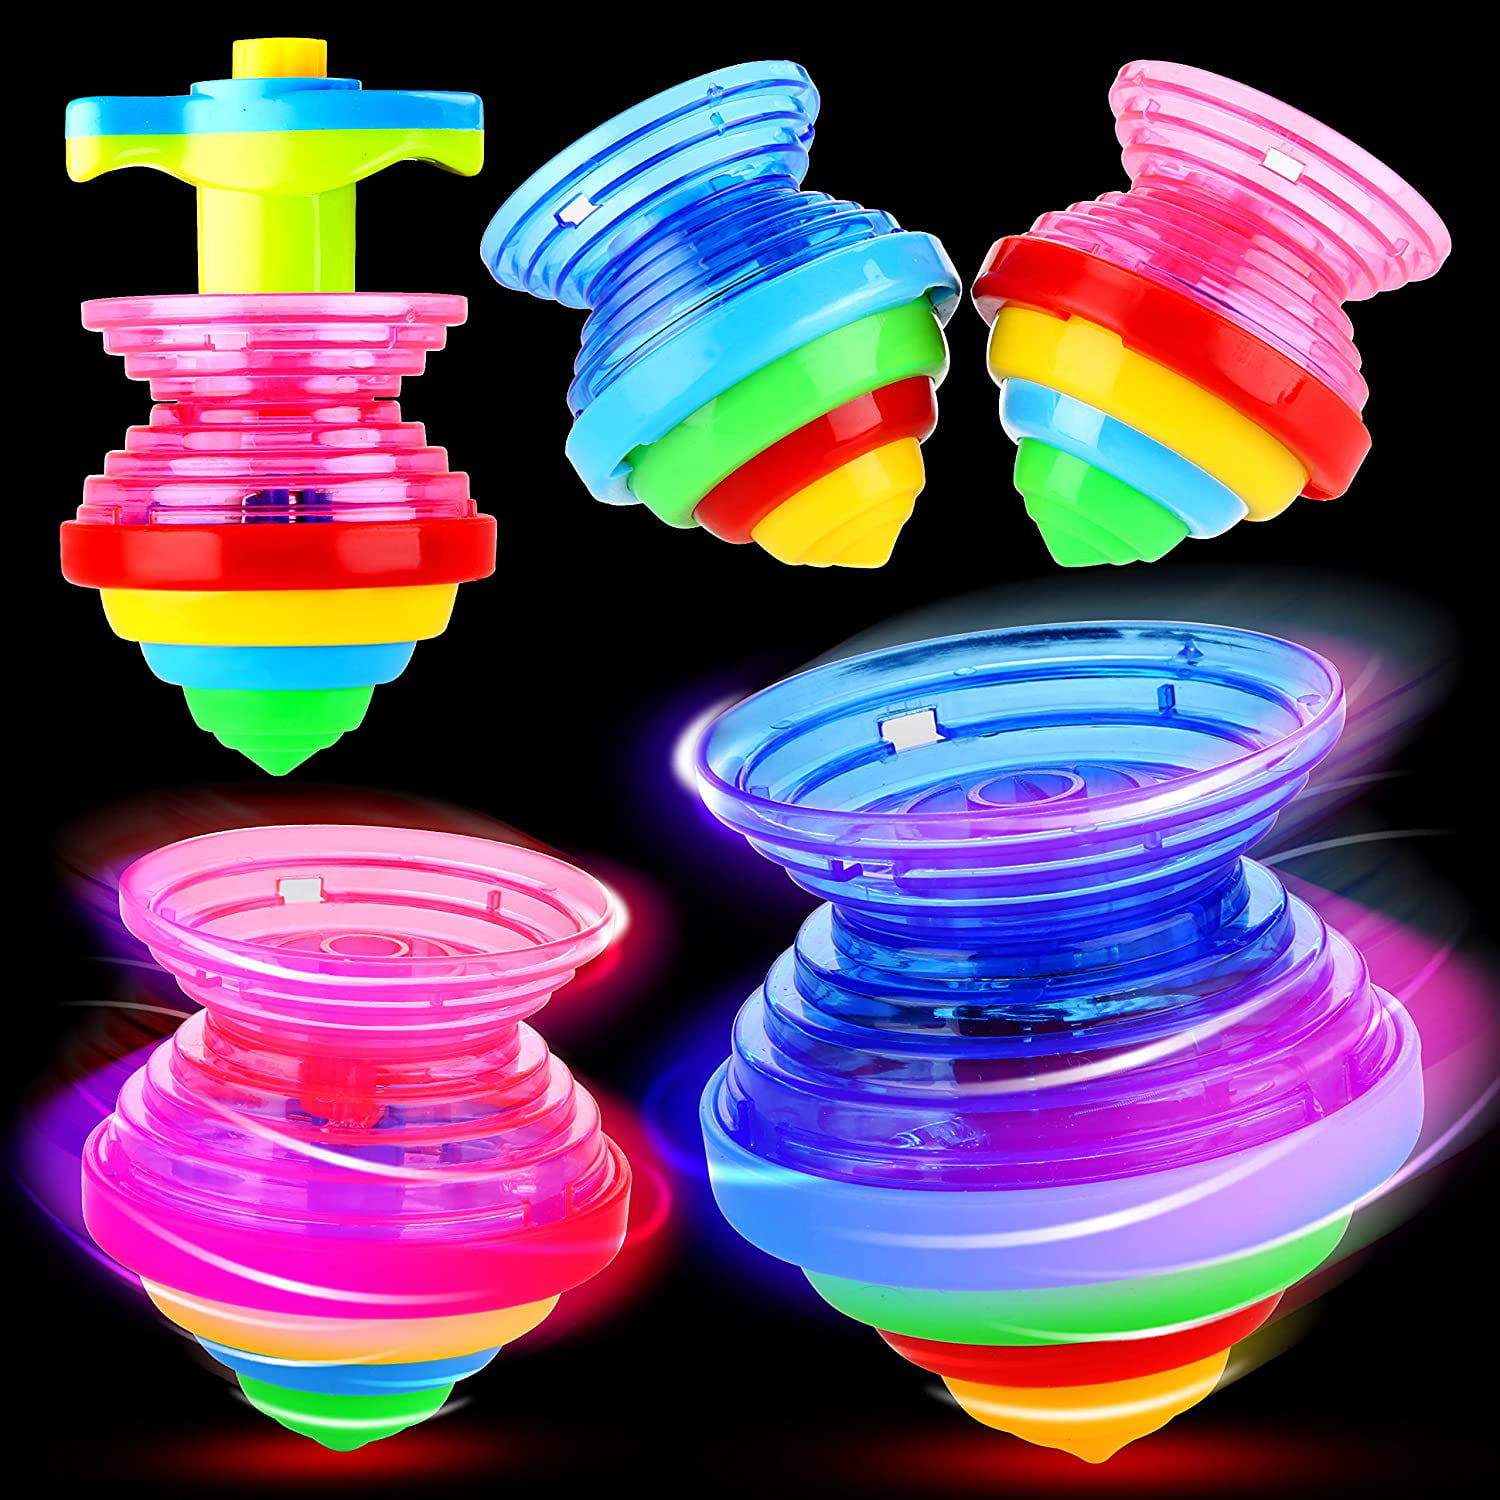 1.75 Inch Spinning Tops in Different Vibrant Colors for Physical Play Enhancing Focus Party Favor 12 Pack Goody Bag Kicko Light Up Spinning Toy Fair Prize